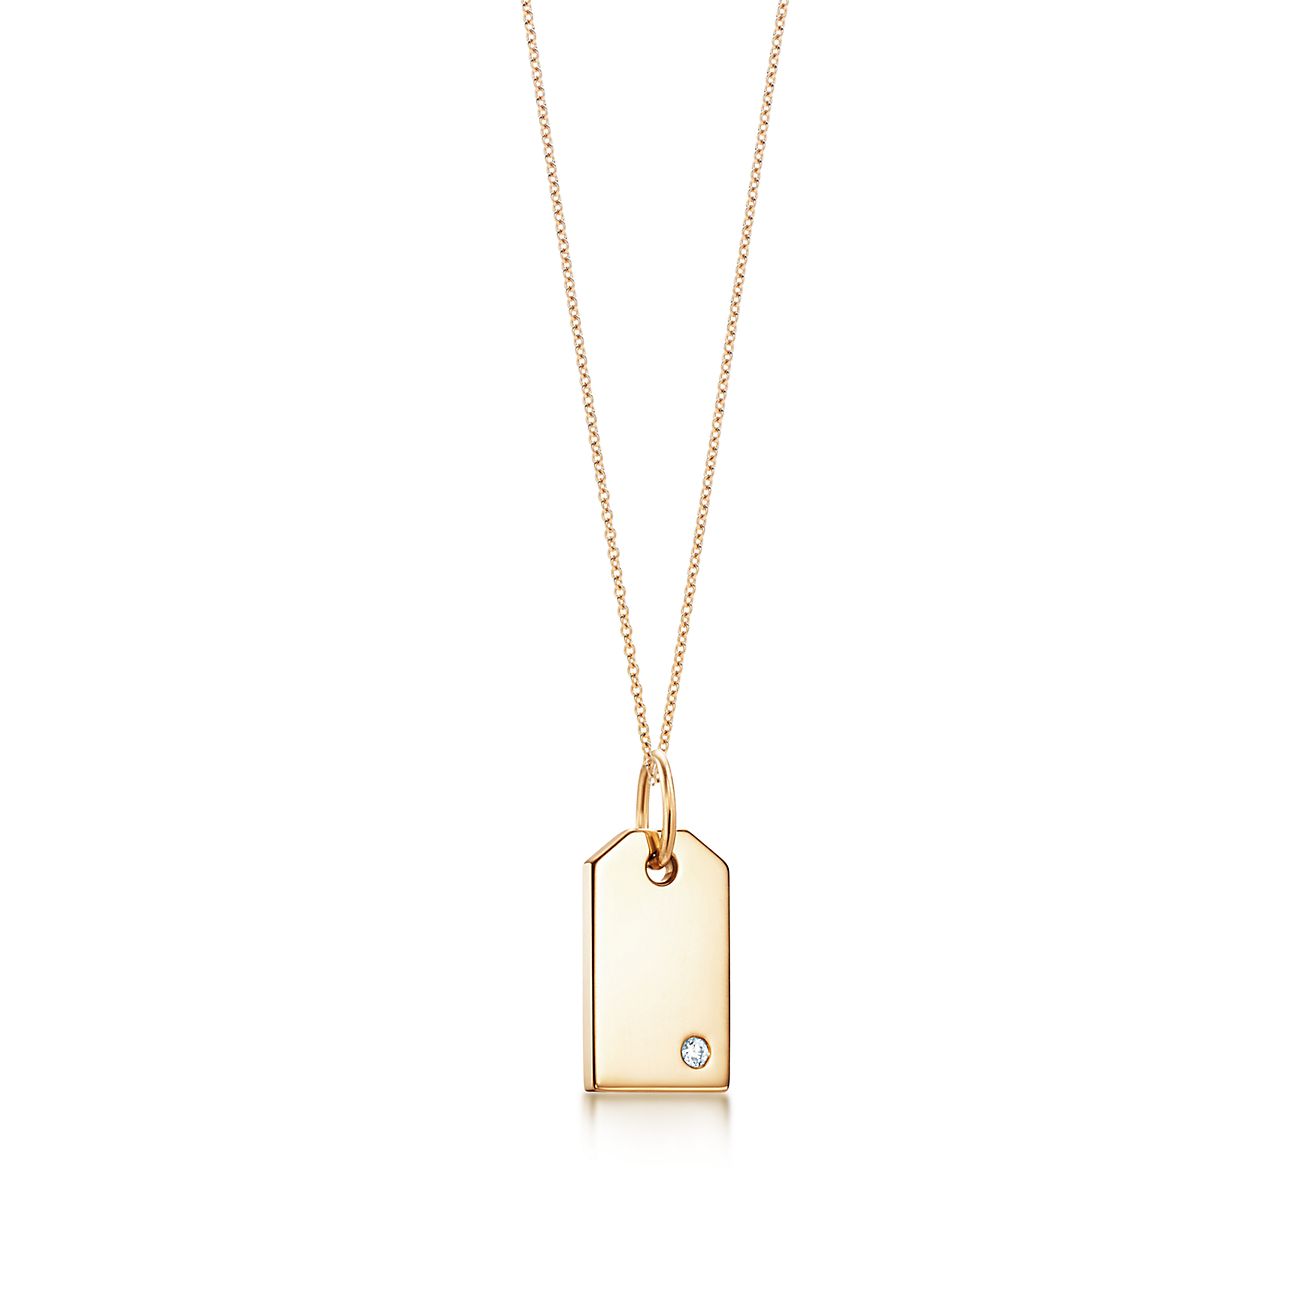 Tiffany Charms tag in 18k gold with a 